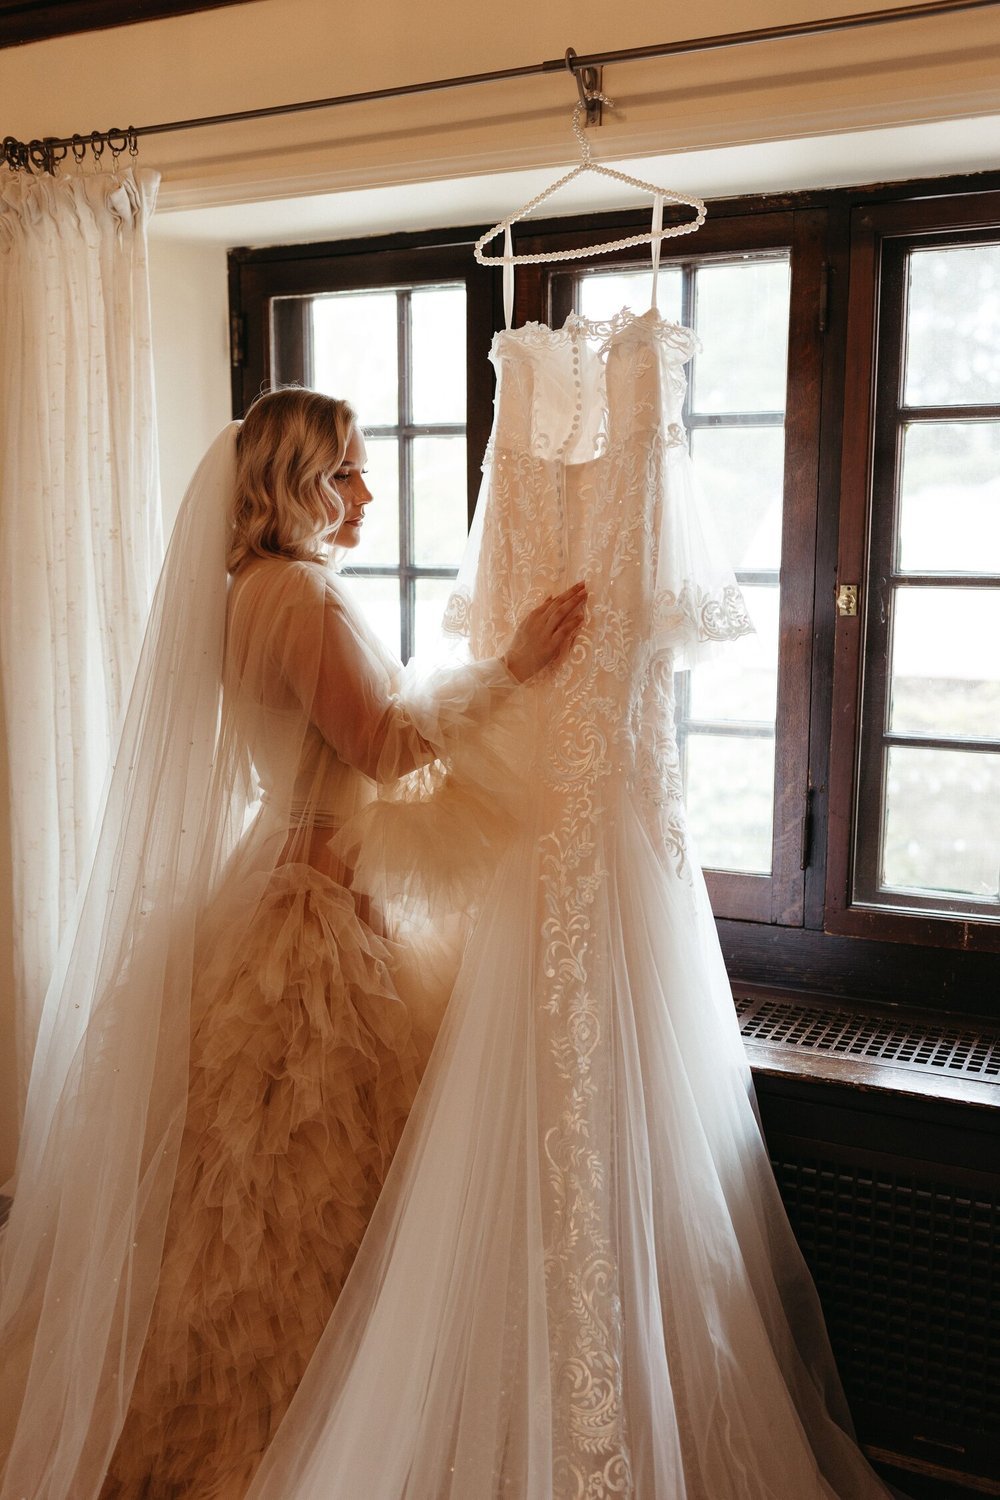 6 Wedding Dress Shopping Traditions and Myths to Follow or Ignore